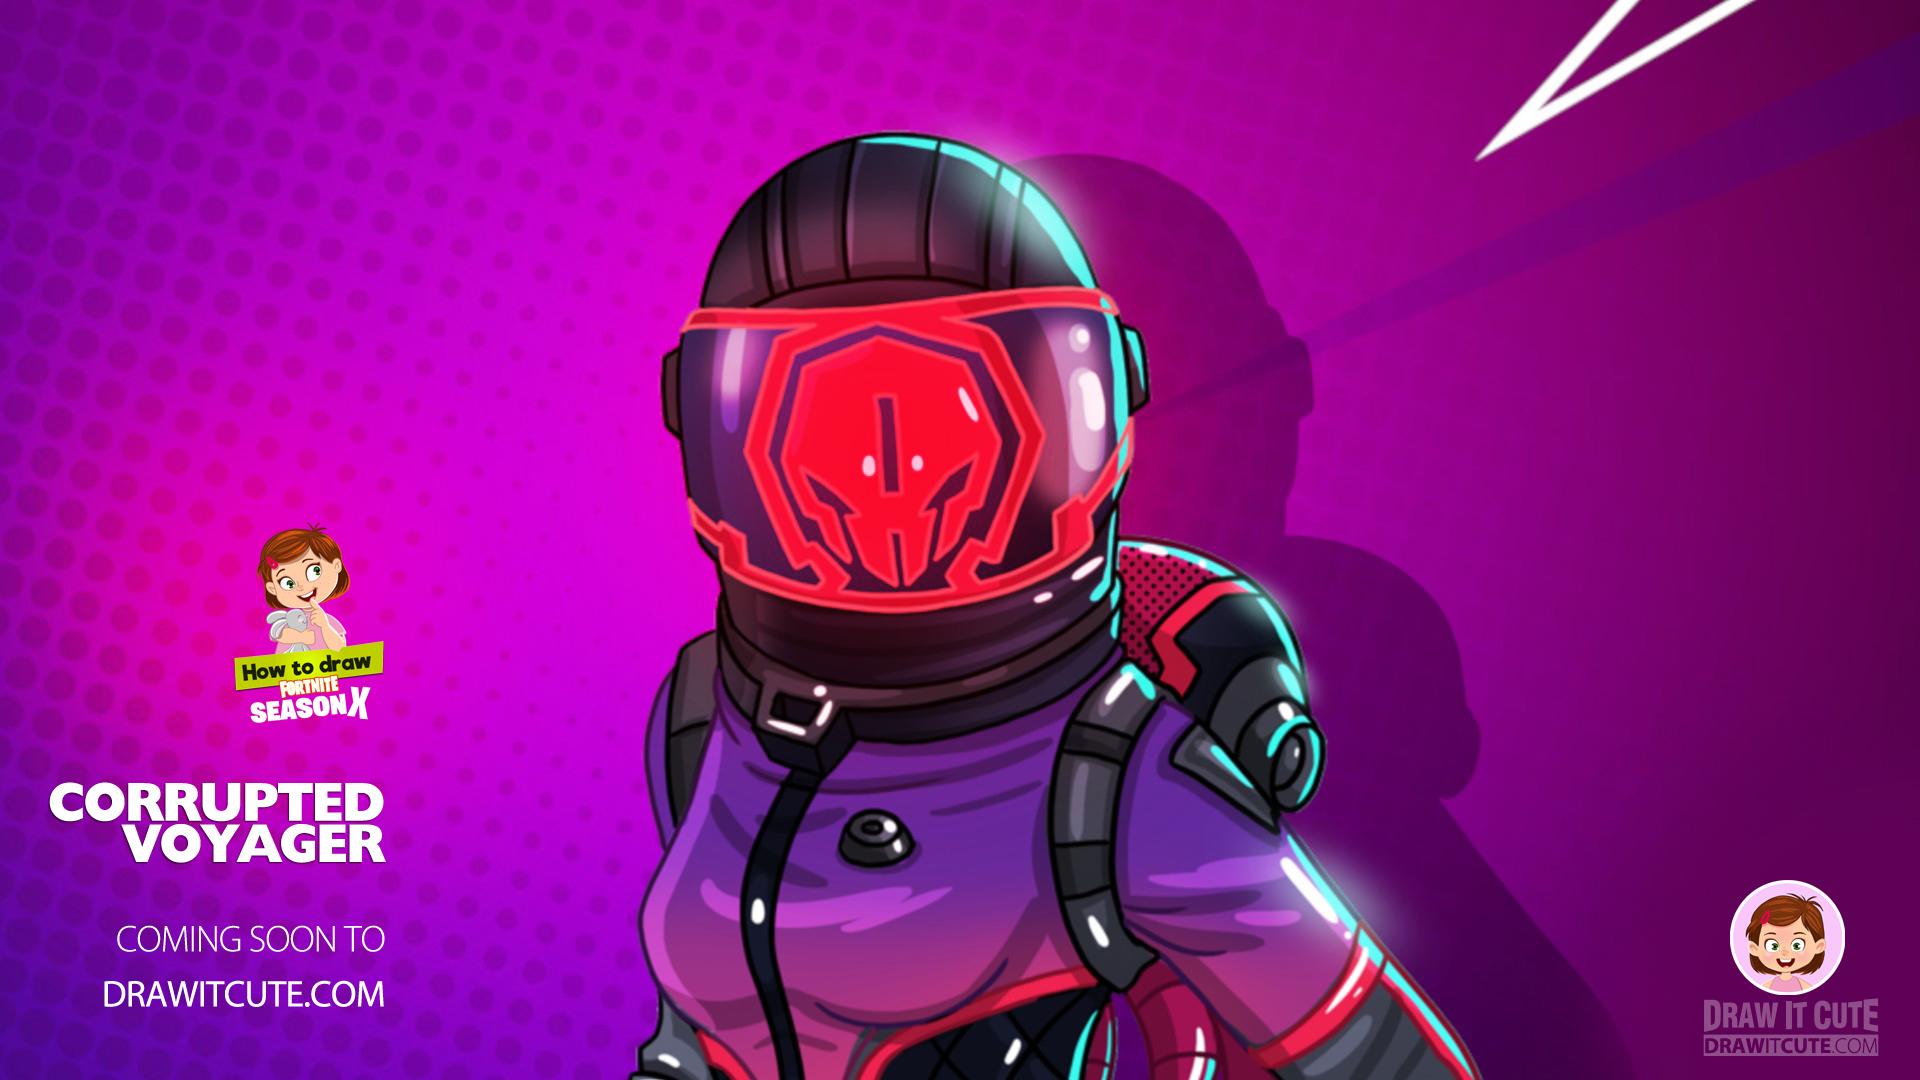 Corrupted Voyager. Fortnite season 10 it cute